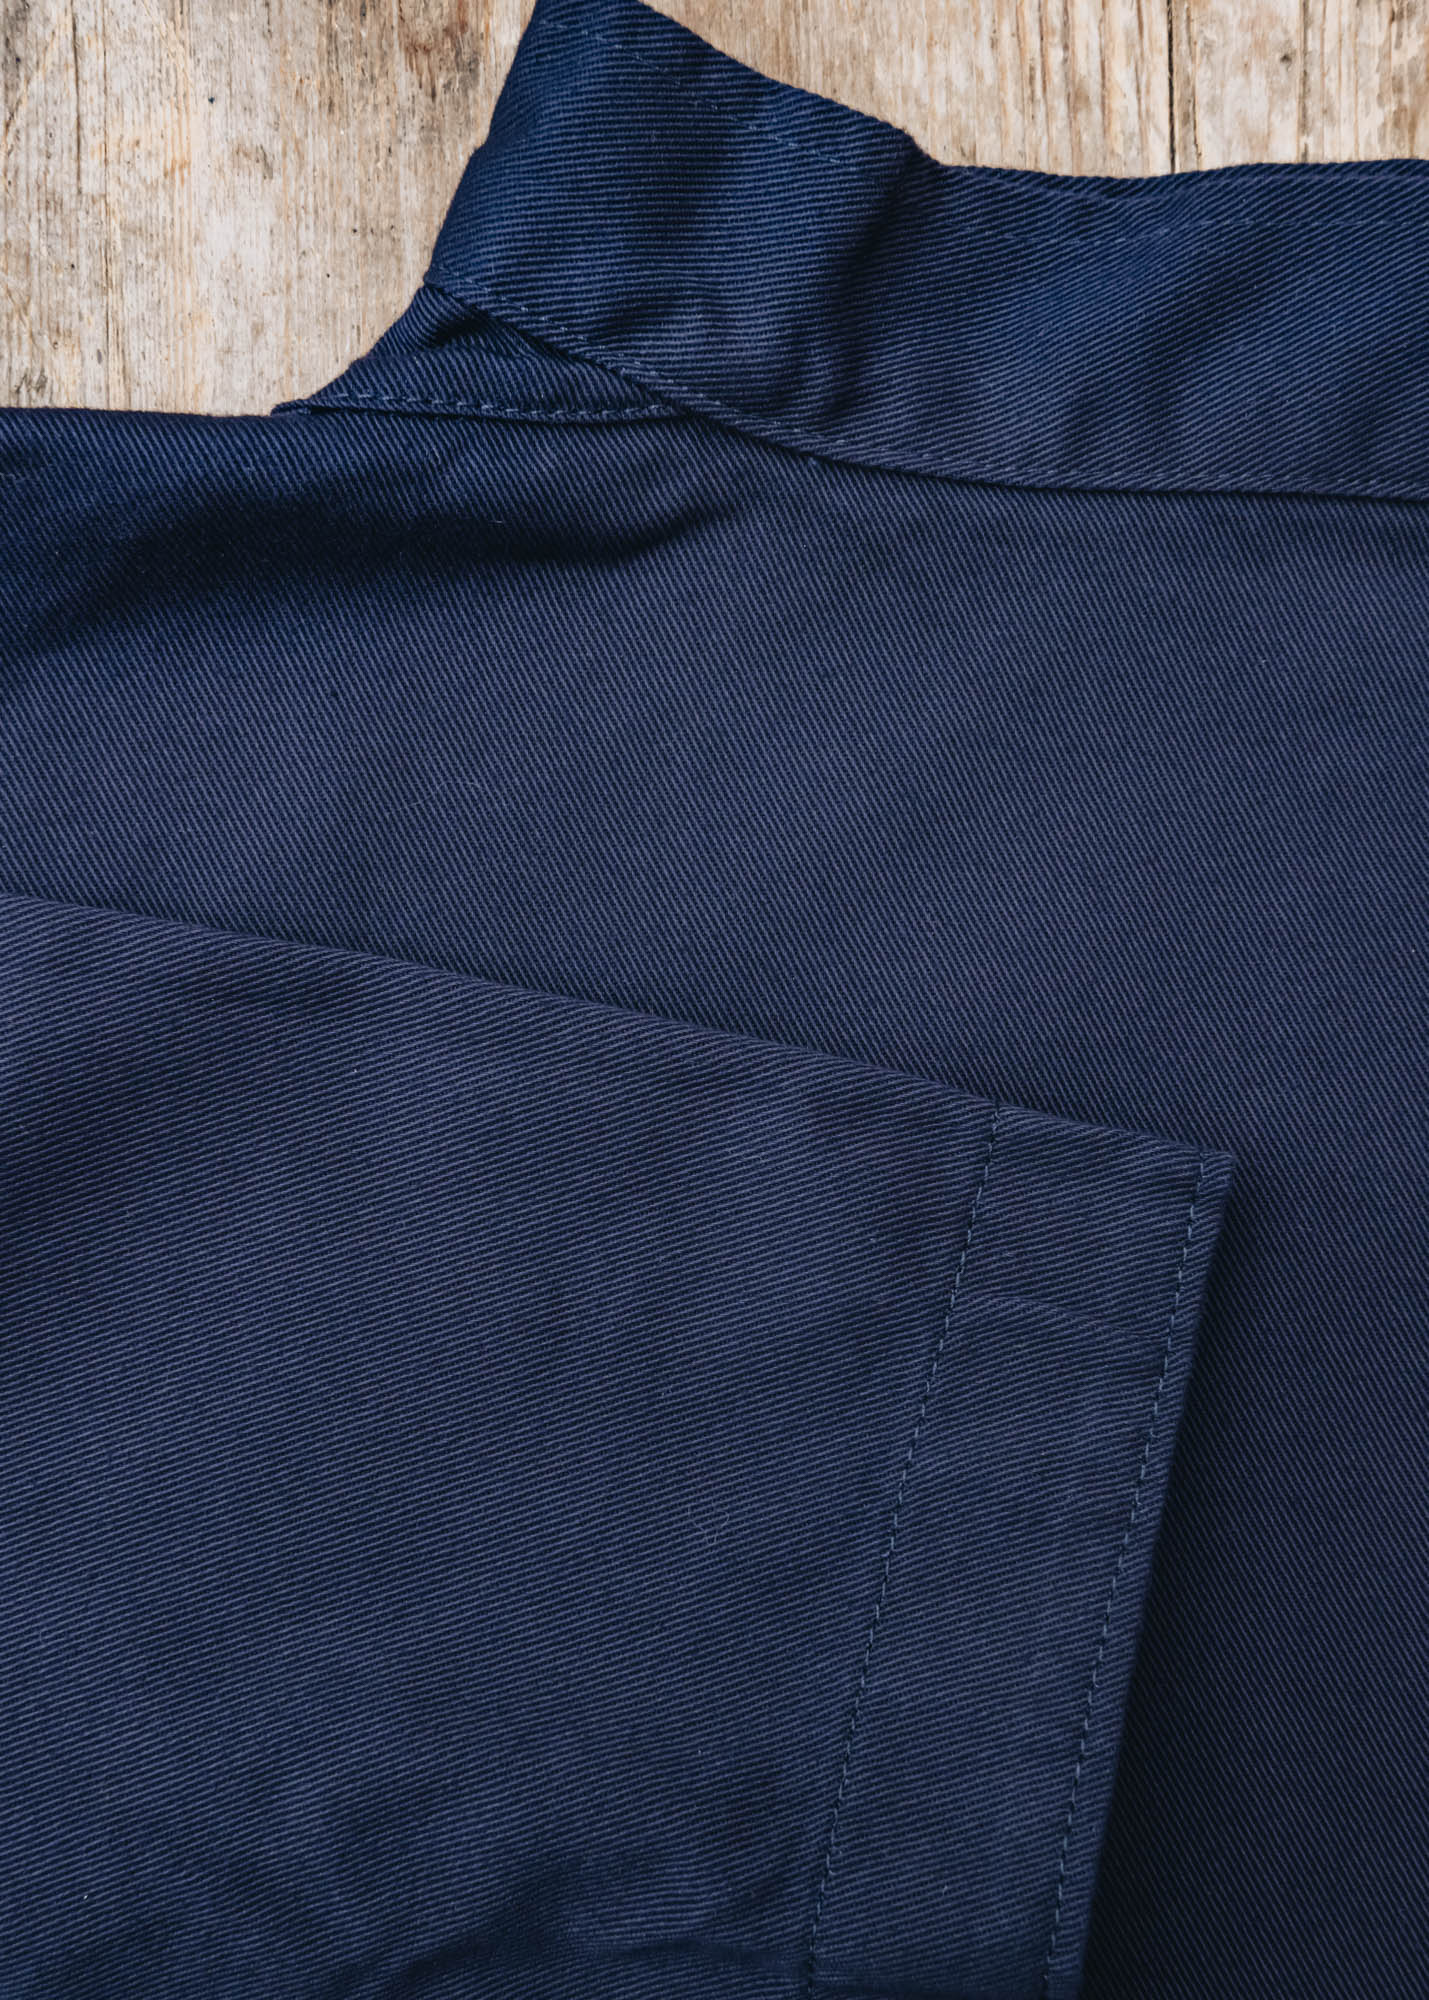 Yarmouth Oilskins Classic Smock in Navy